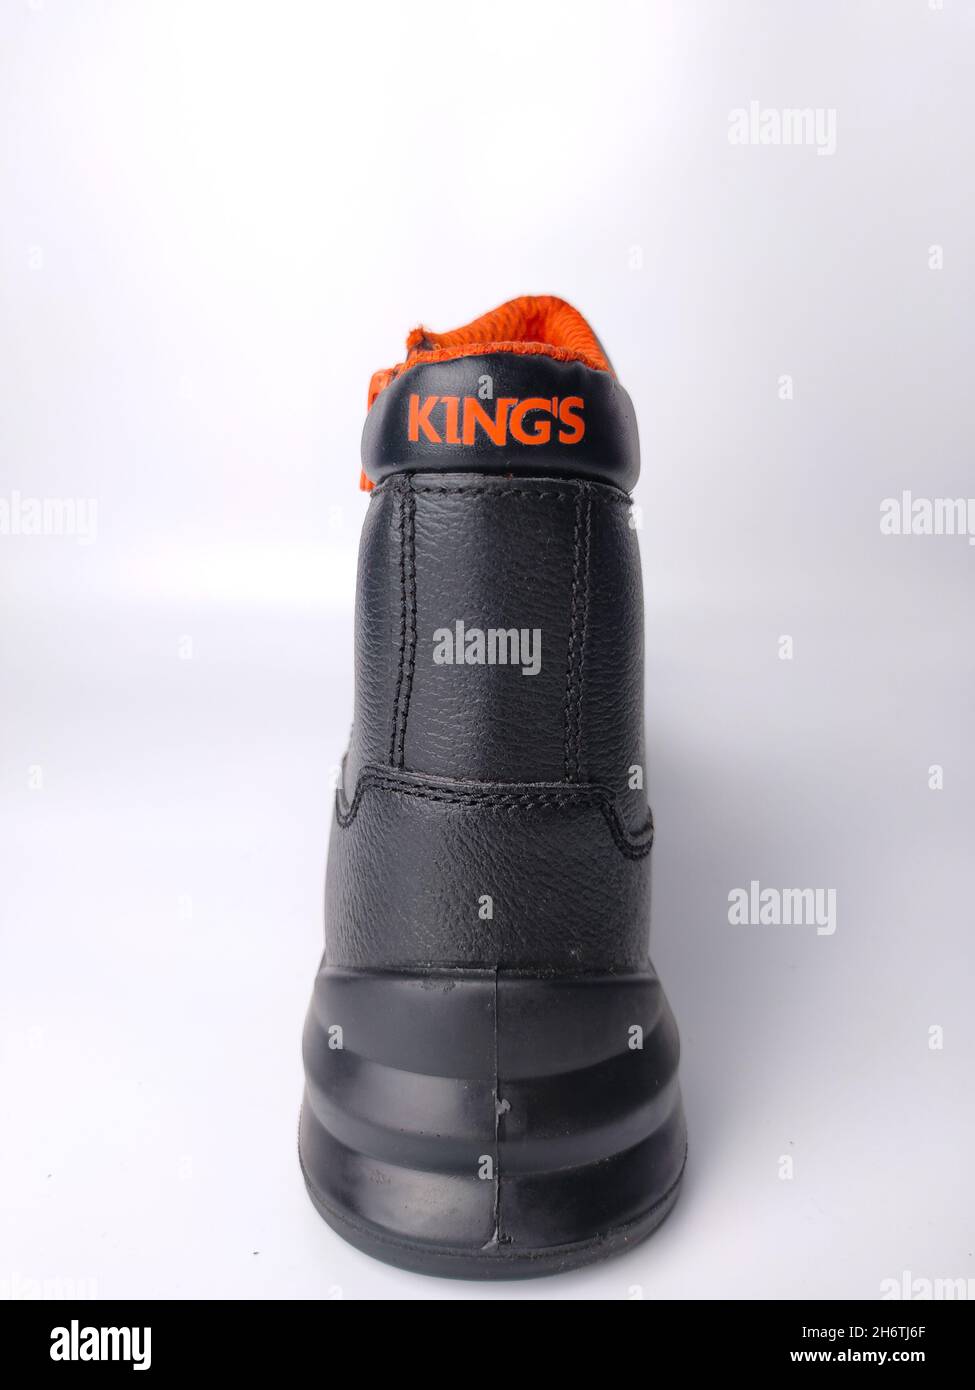 Malaysia, Perak, 17 October 2021: Kings brand safety shoes on a white background. Stock Photo